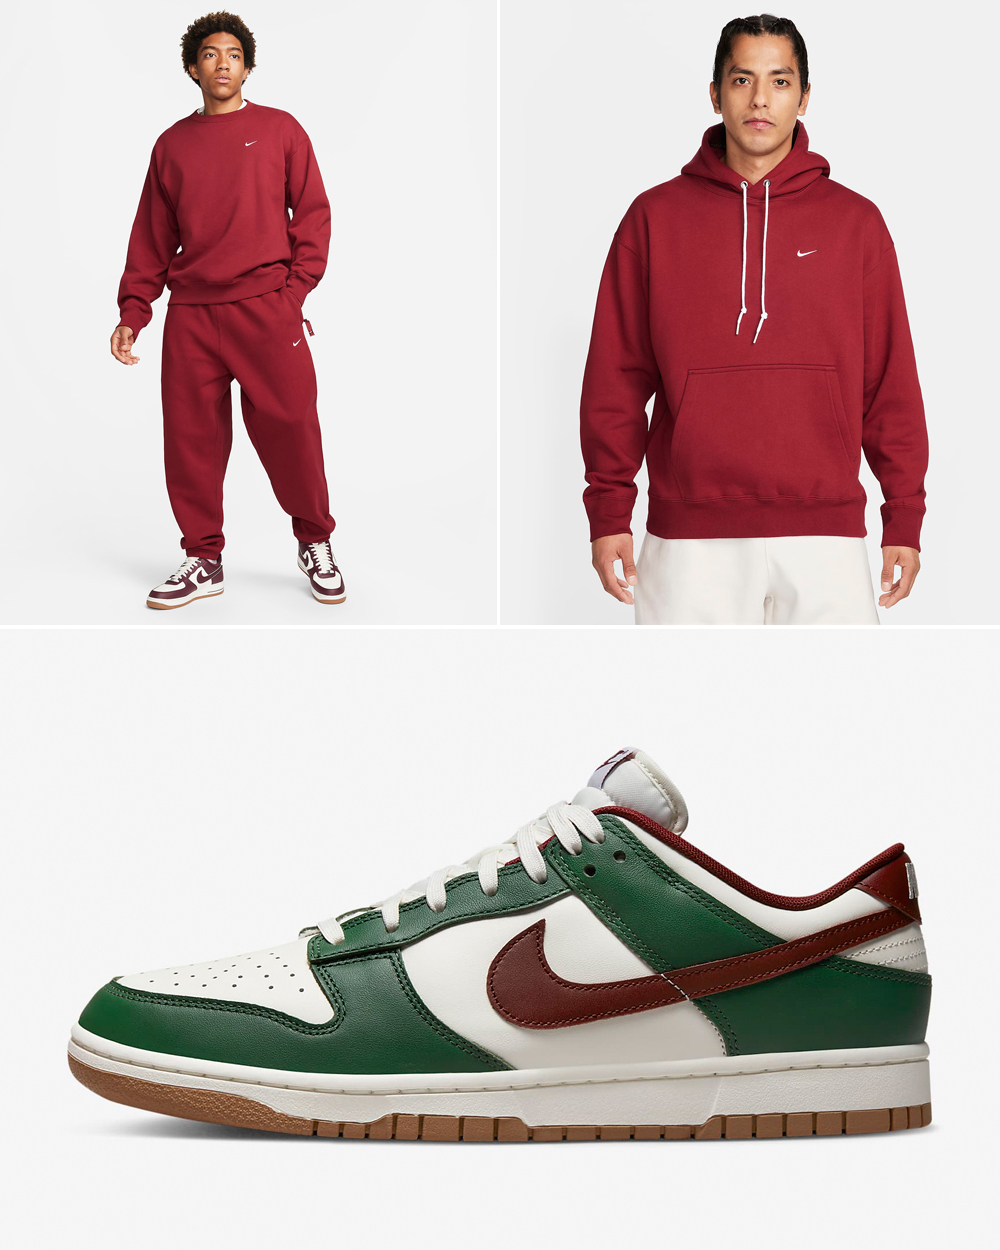 Nike-Dunk-Low-Gorge-Green-Team-Red-Clothing-Match